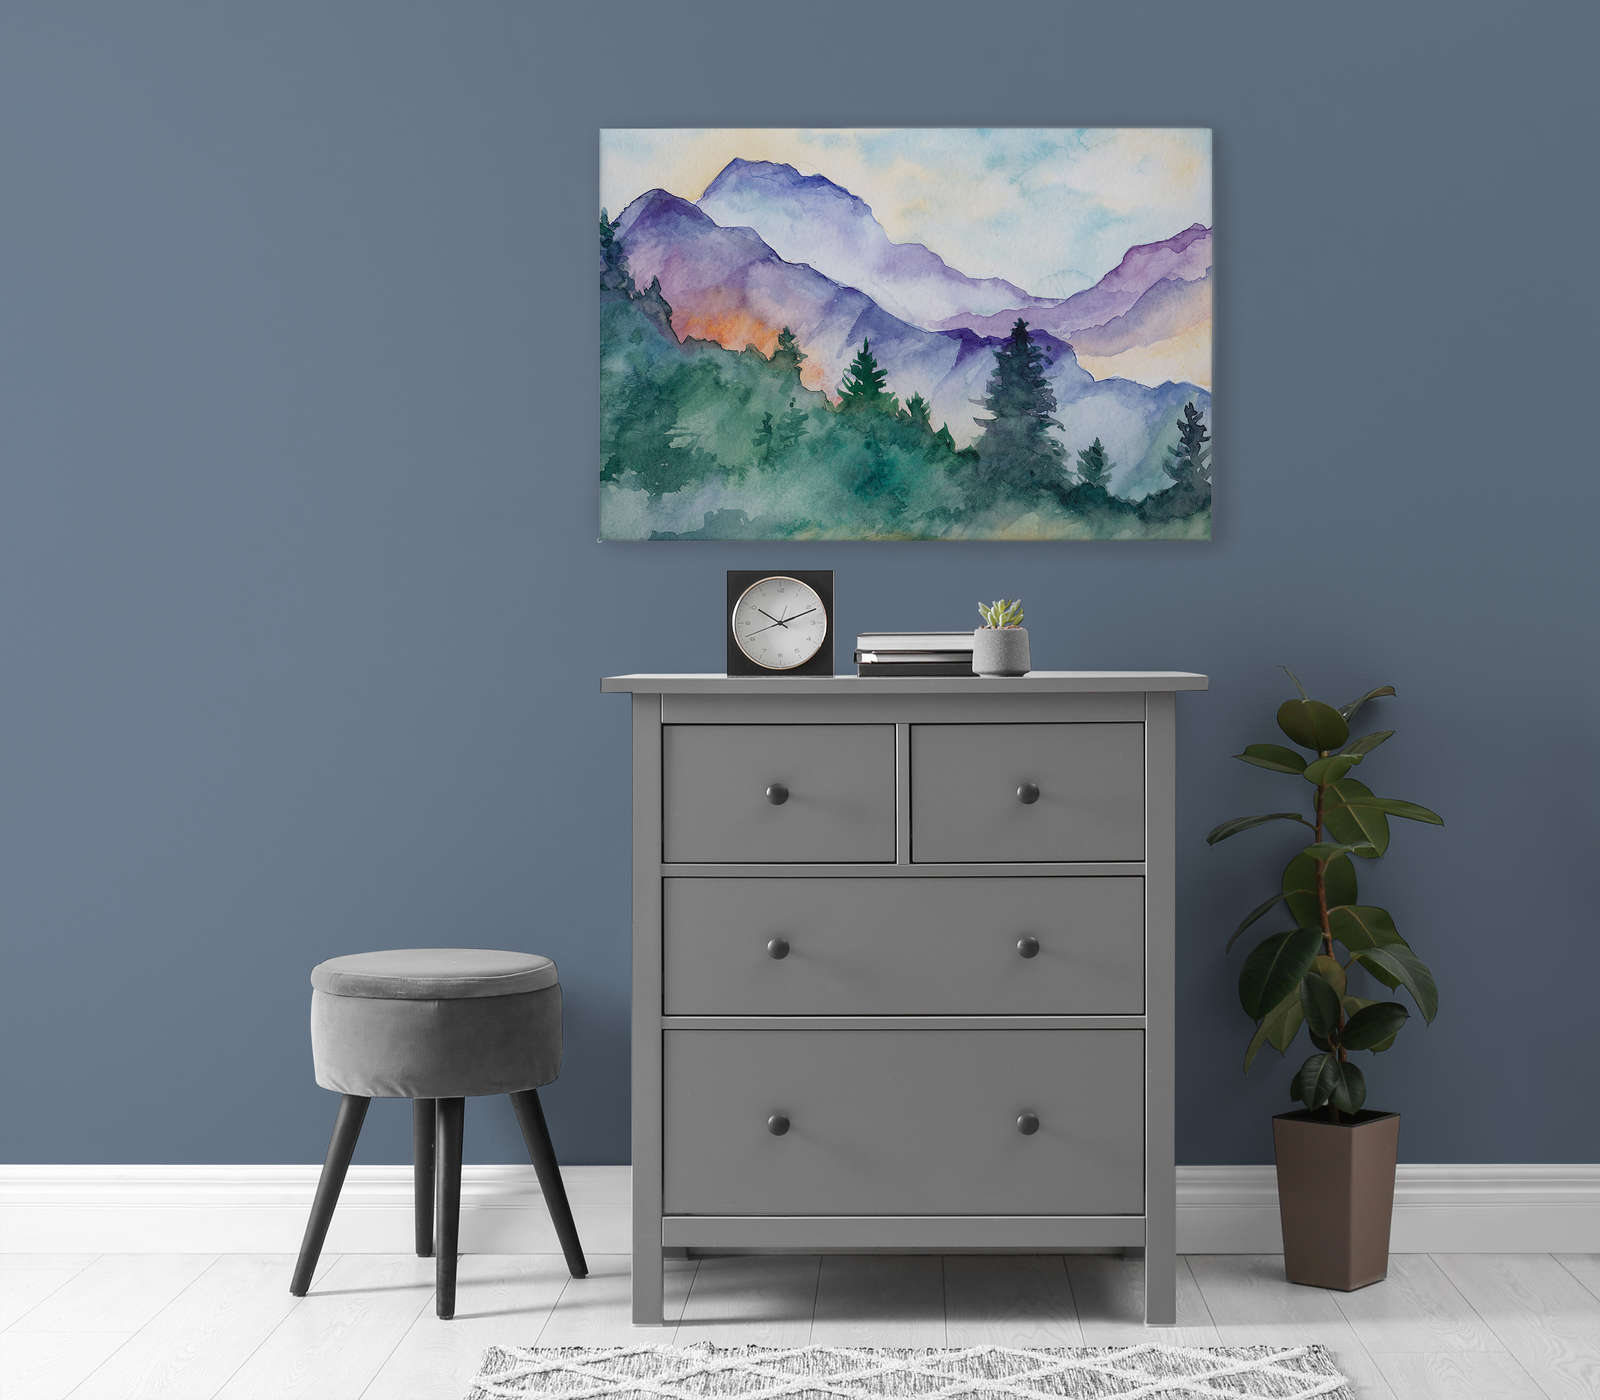             Canvas painting mountain landscape painted with watercolours - 0,90 m x 0,60 m
        